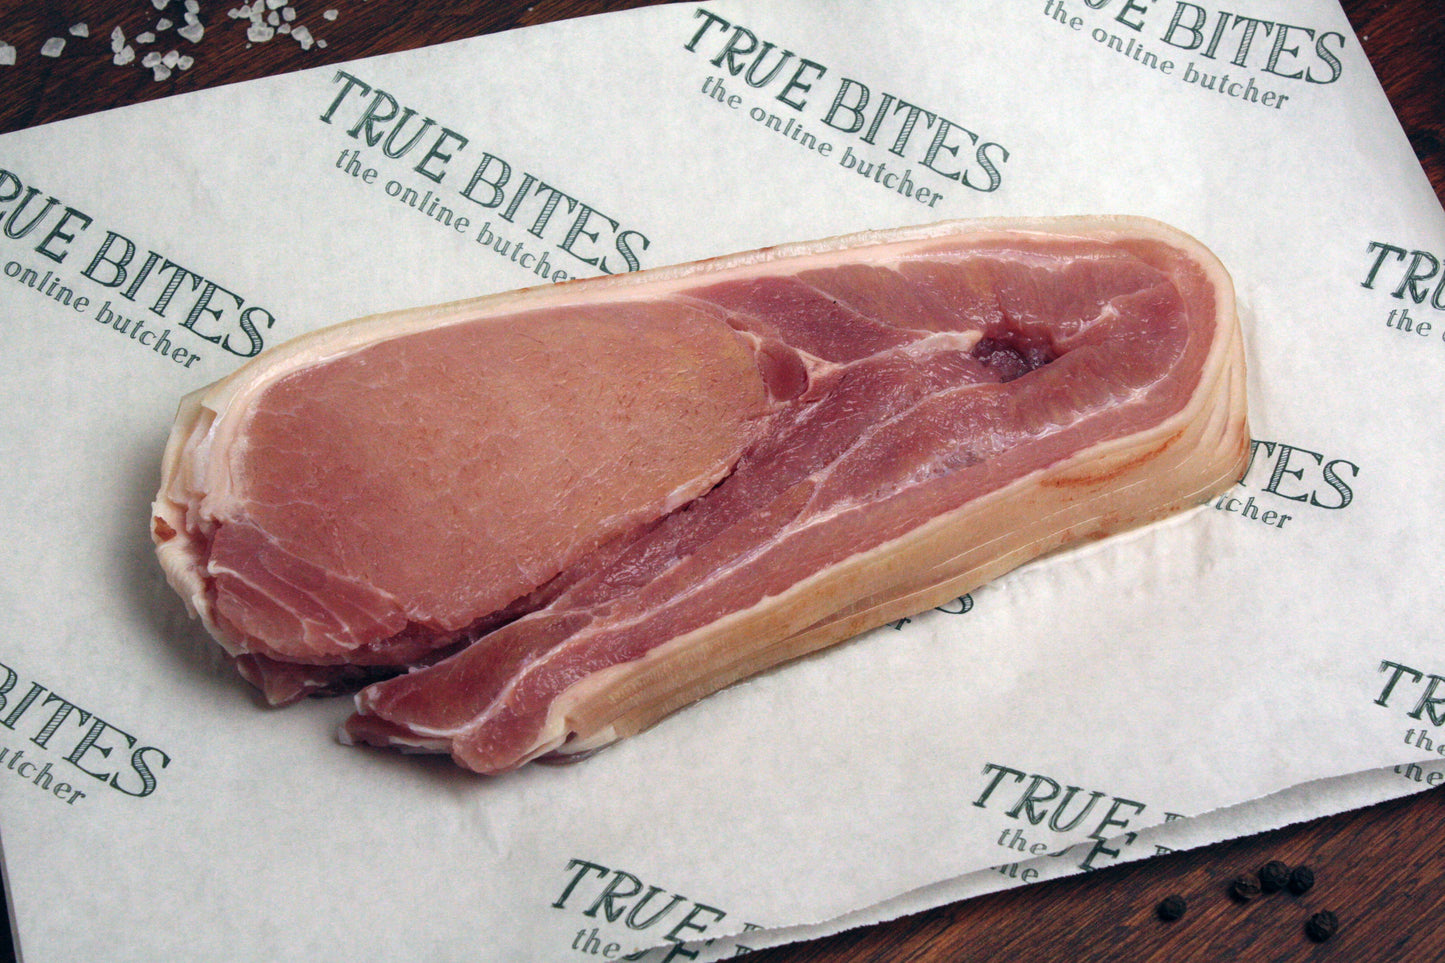 rasher of middle bacon displayed on true bites branded greaseproof paper